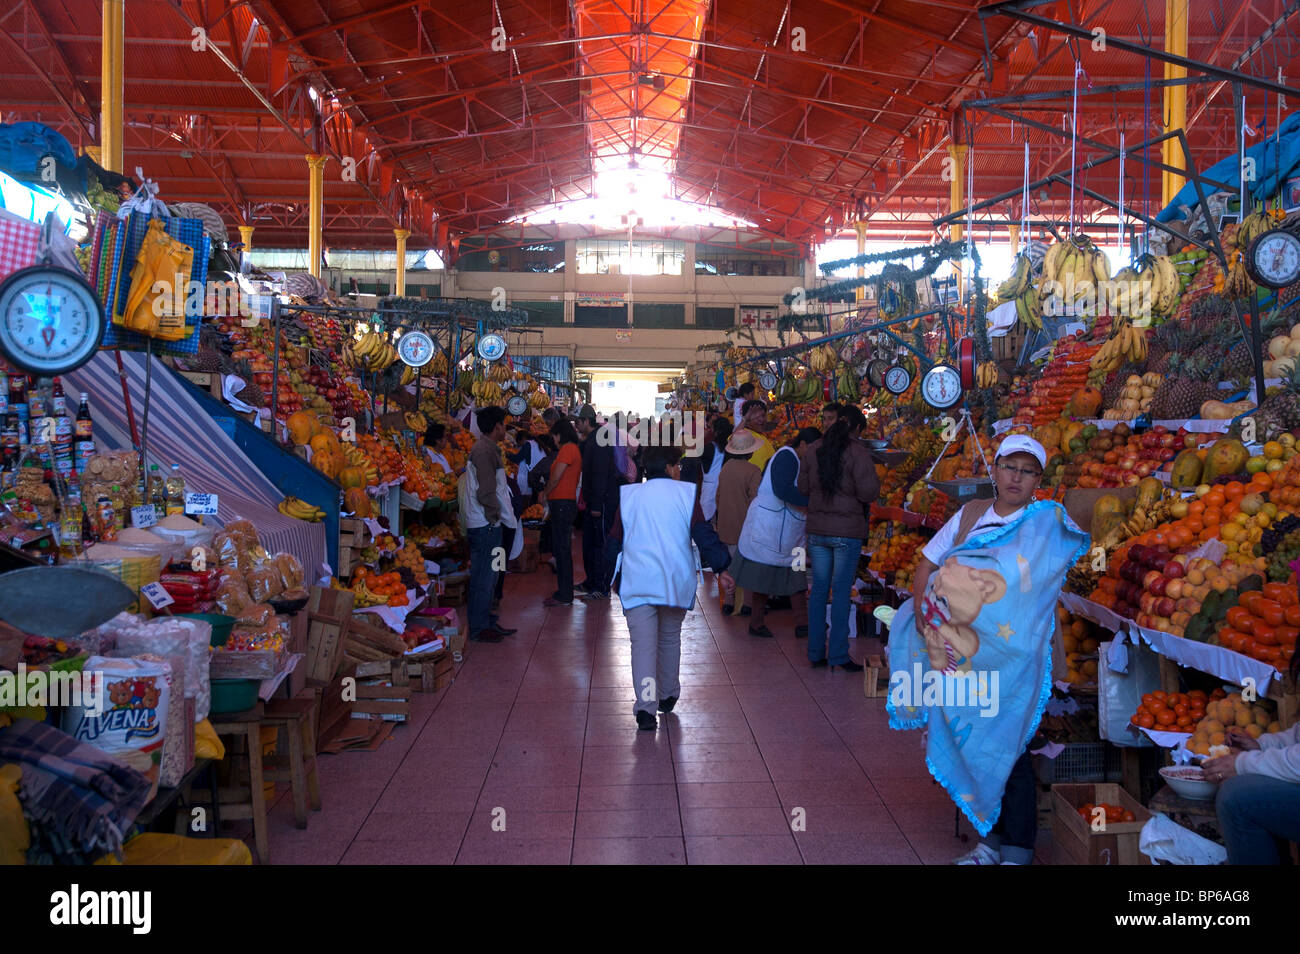 General view of the market in Arequipa, Peru. Stock Photo